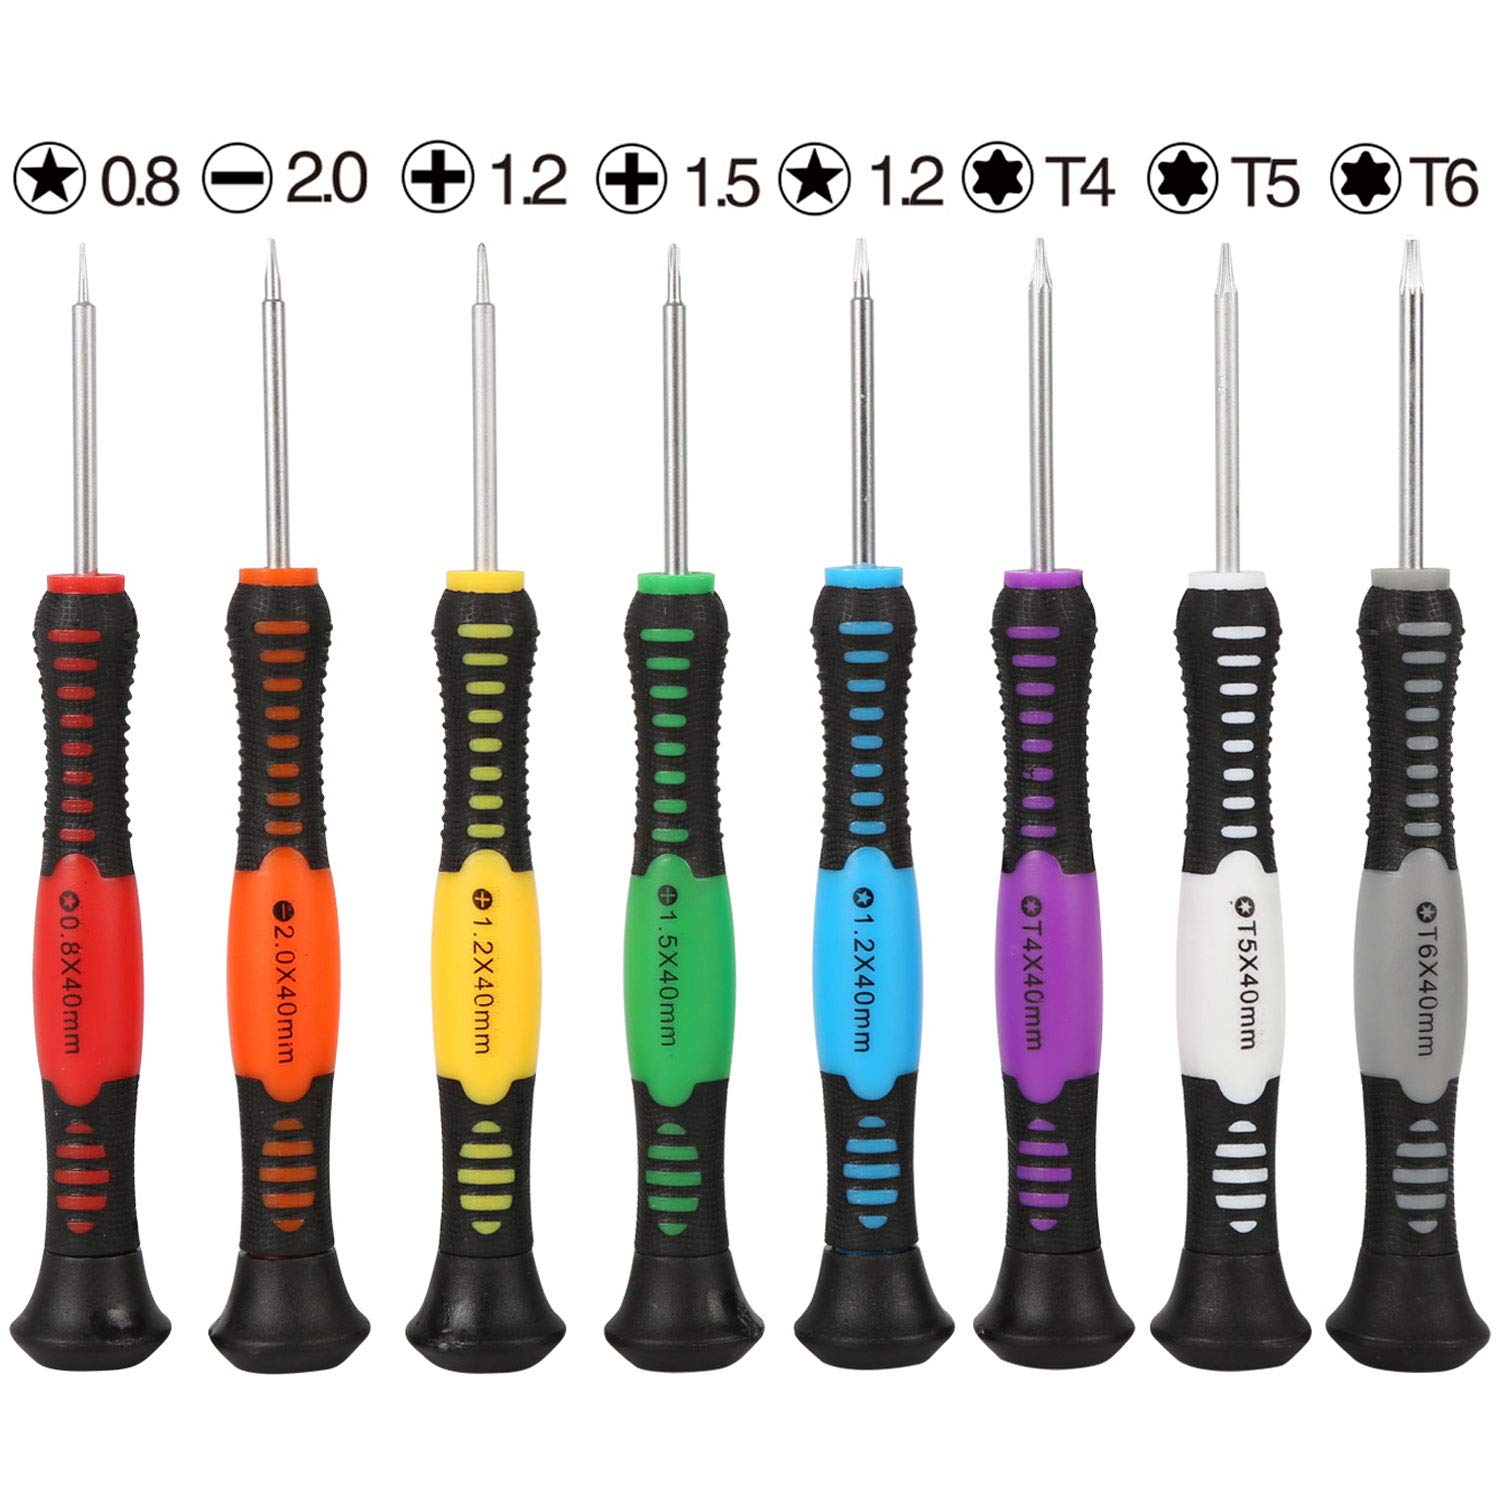 Kaisi 16-Piece Precision Screwdriver Set Repair Tool Kit Compatible Samsung, iPhone, iPad, Computers, Laptops and Other Devices